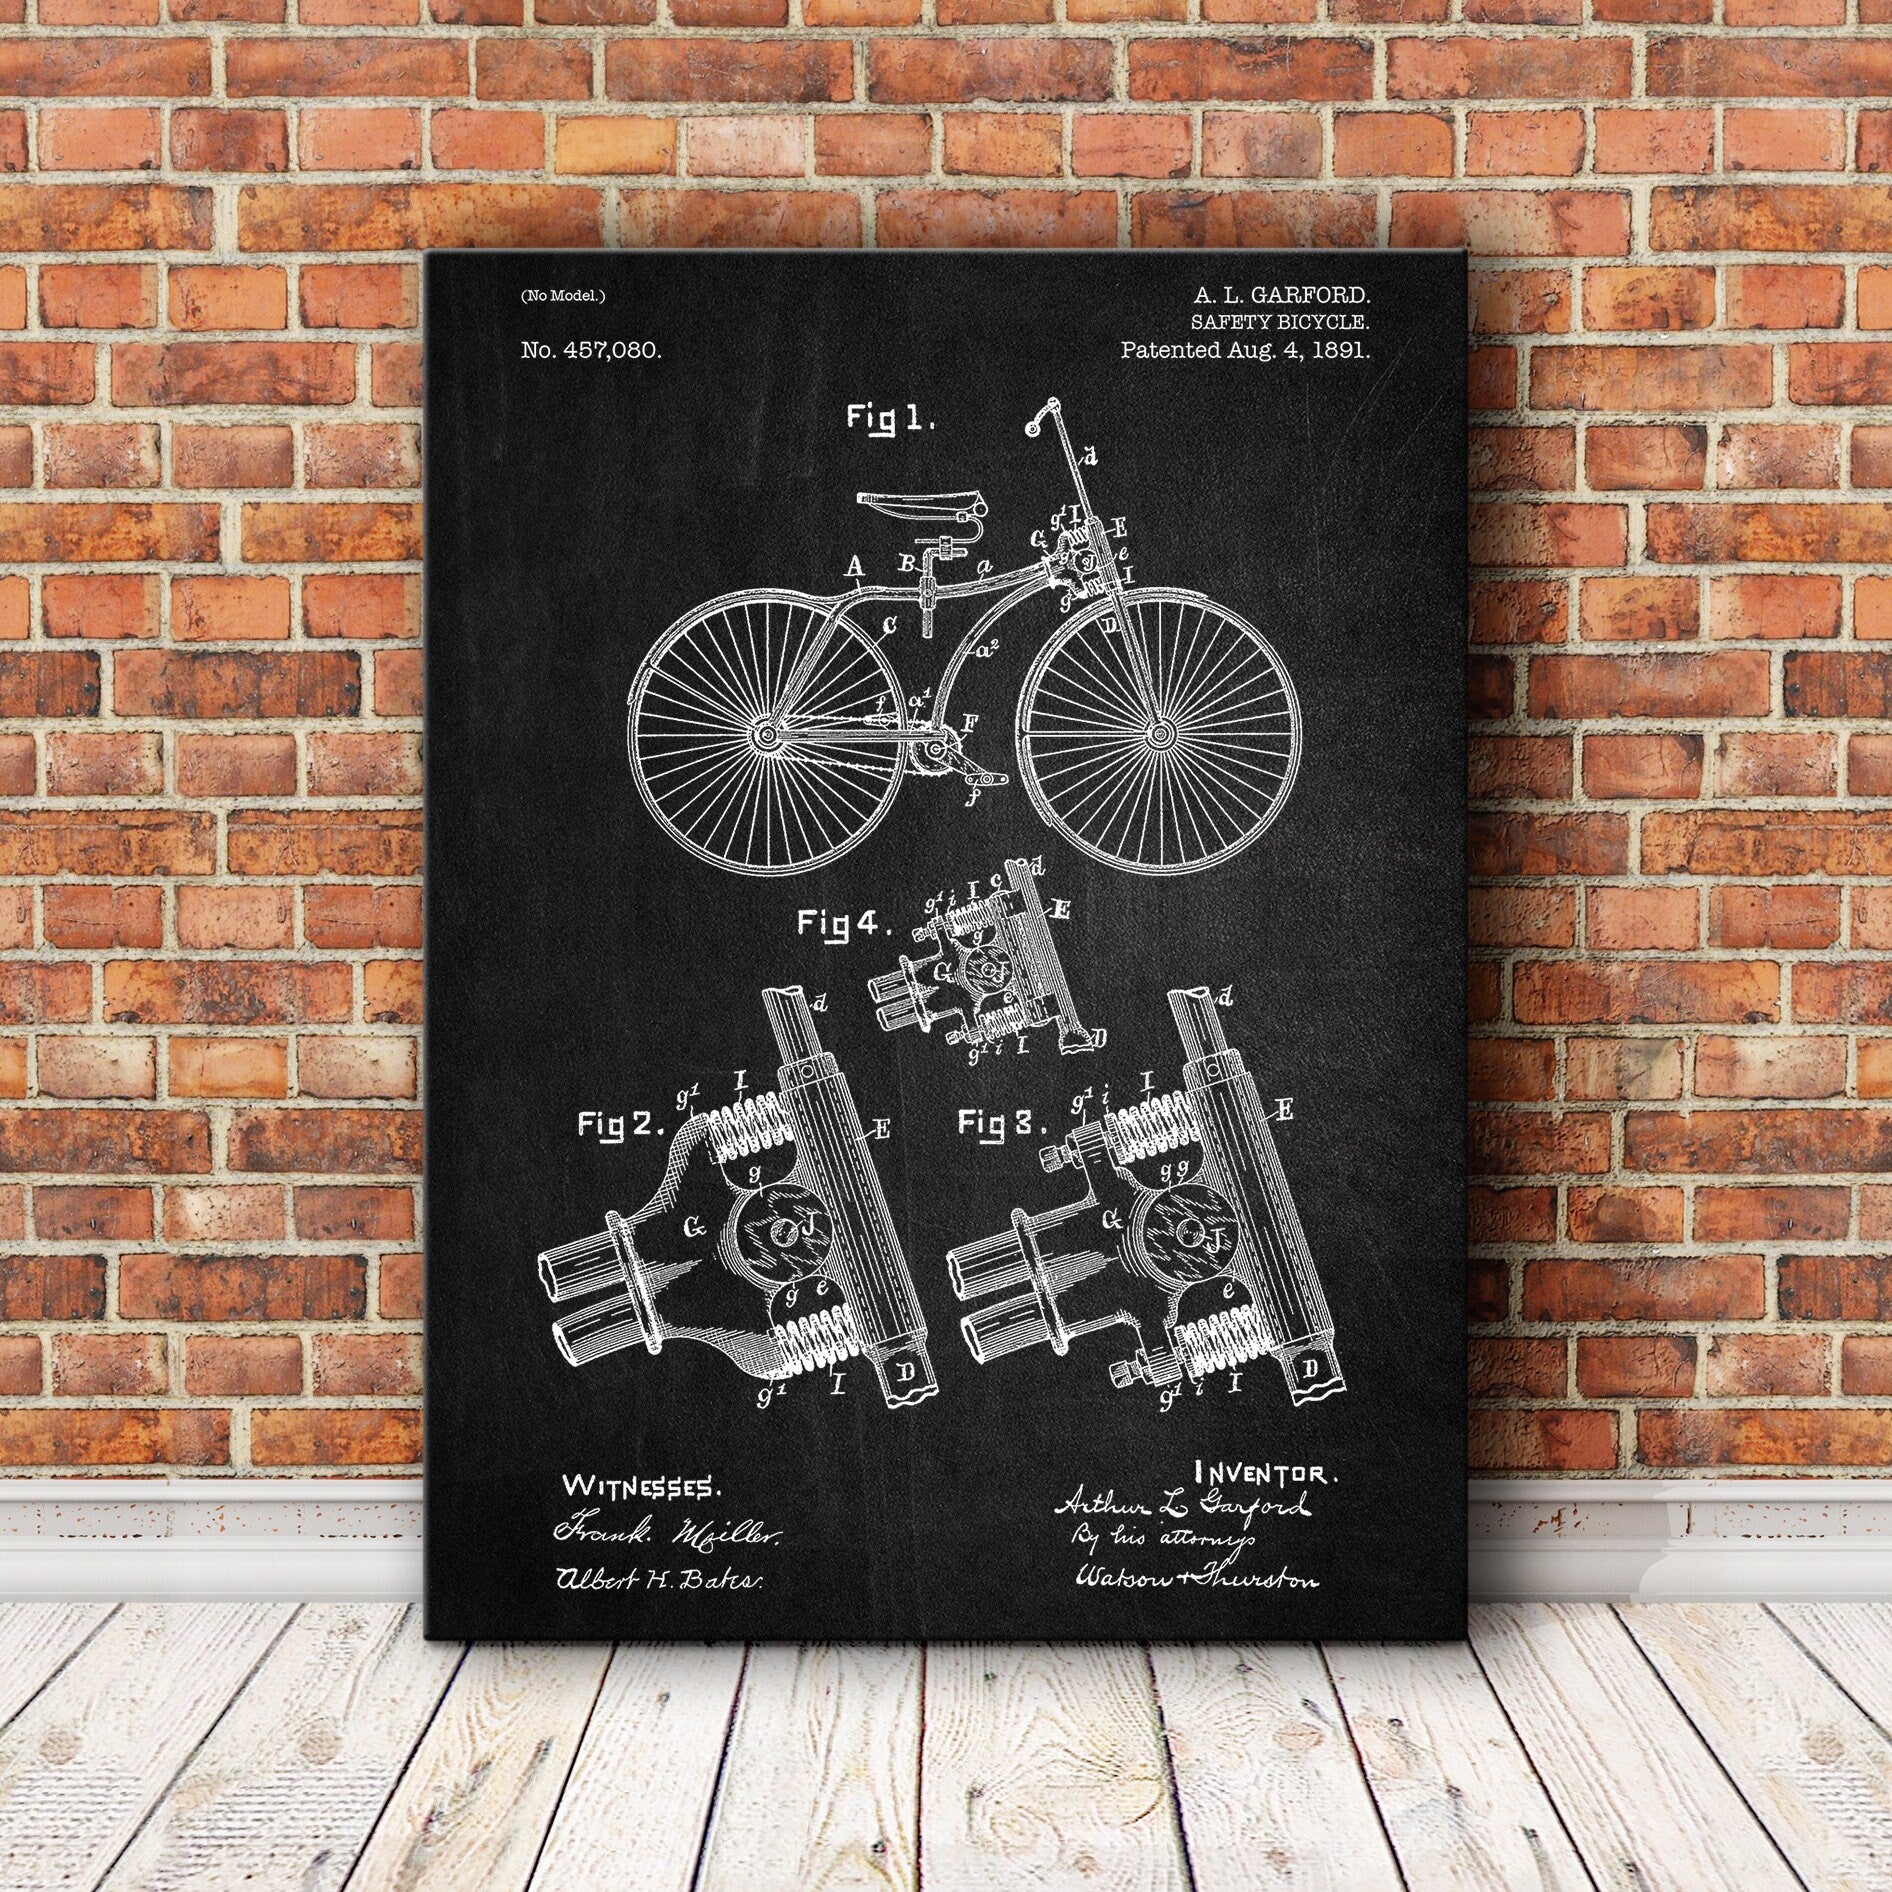 Sports Patent print, Safety Bicycle for Sports Patent print, Patent print, Patent print design, Vintage patent print, Sports Art